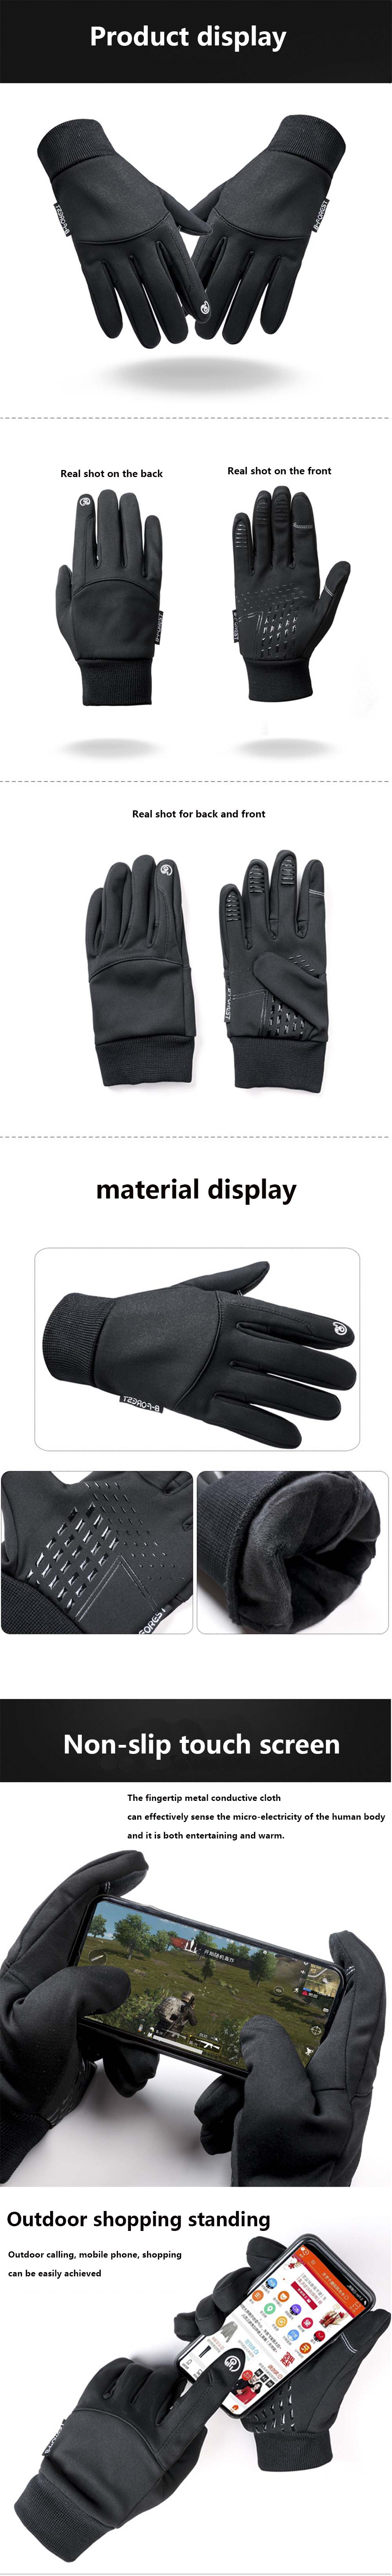 KALOAD-Winter-Electric-Cycling-Gloves-Touch-Screen-Golves-Full-Finger-Windproof-Thermal-Warm-Non-Sli-1923281-2